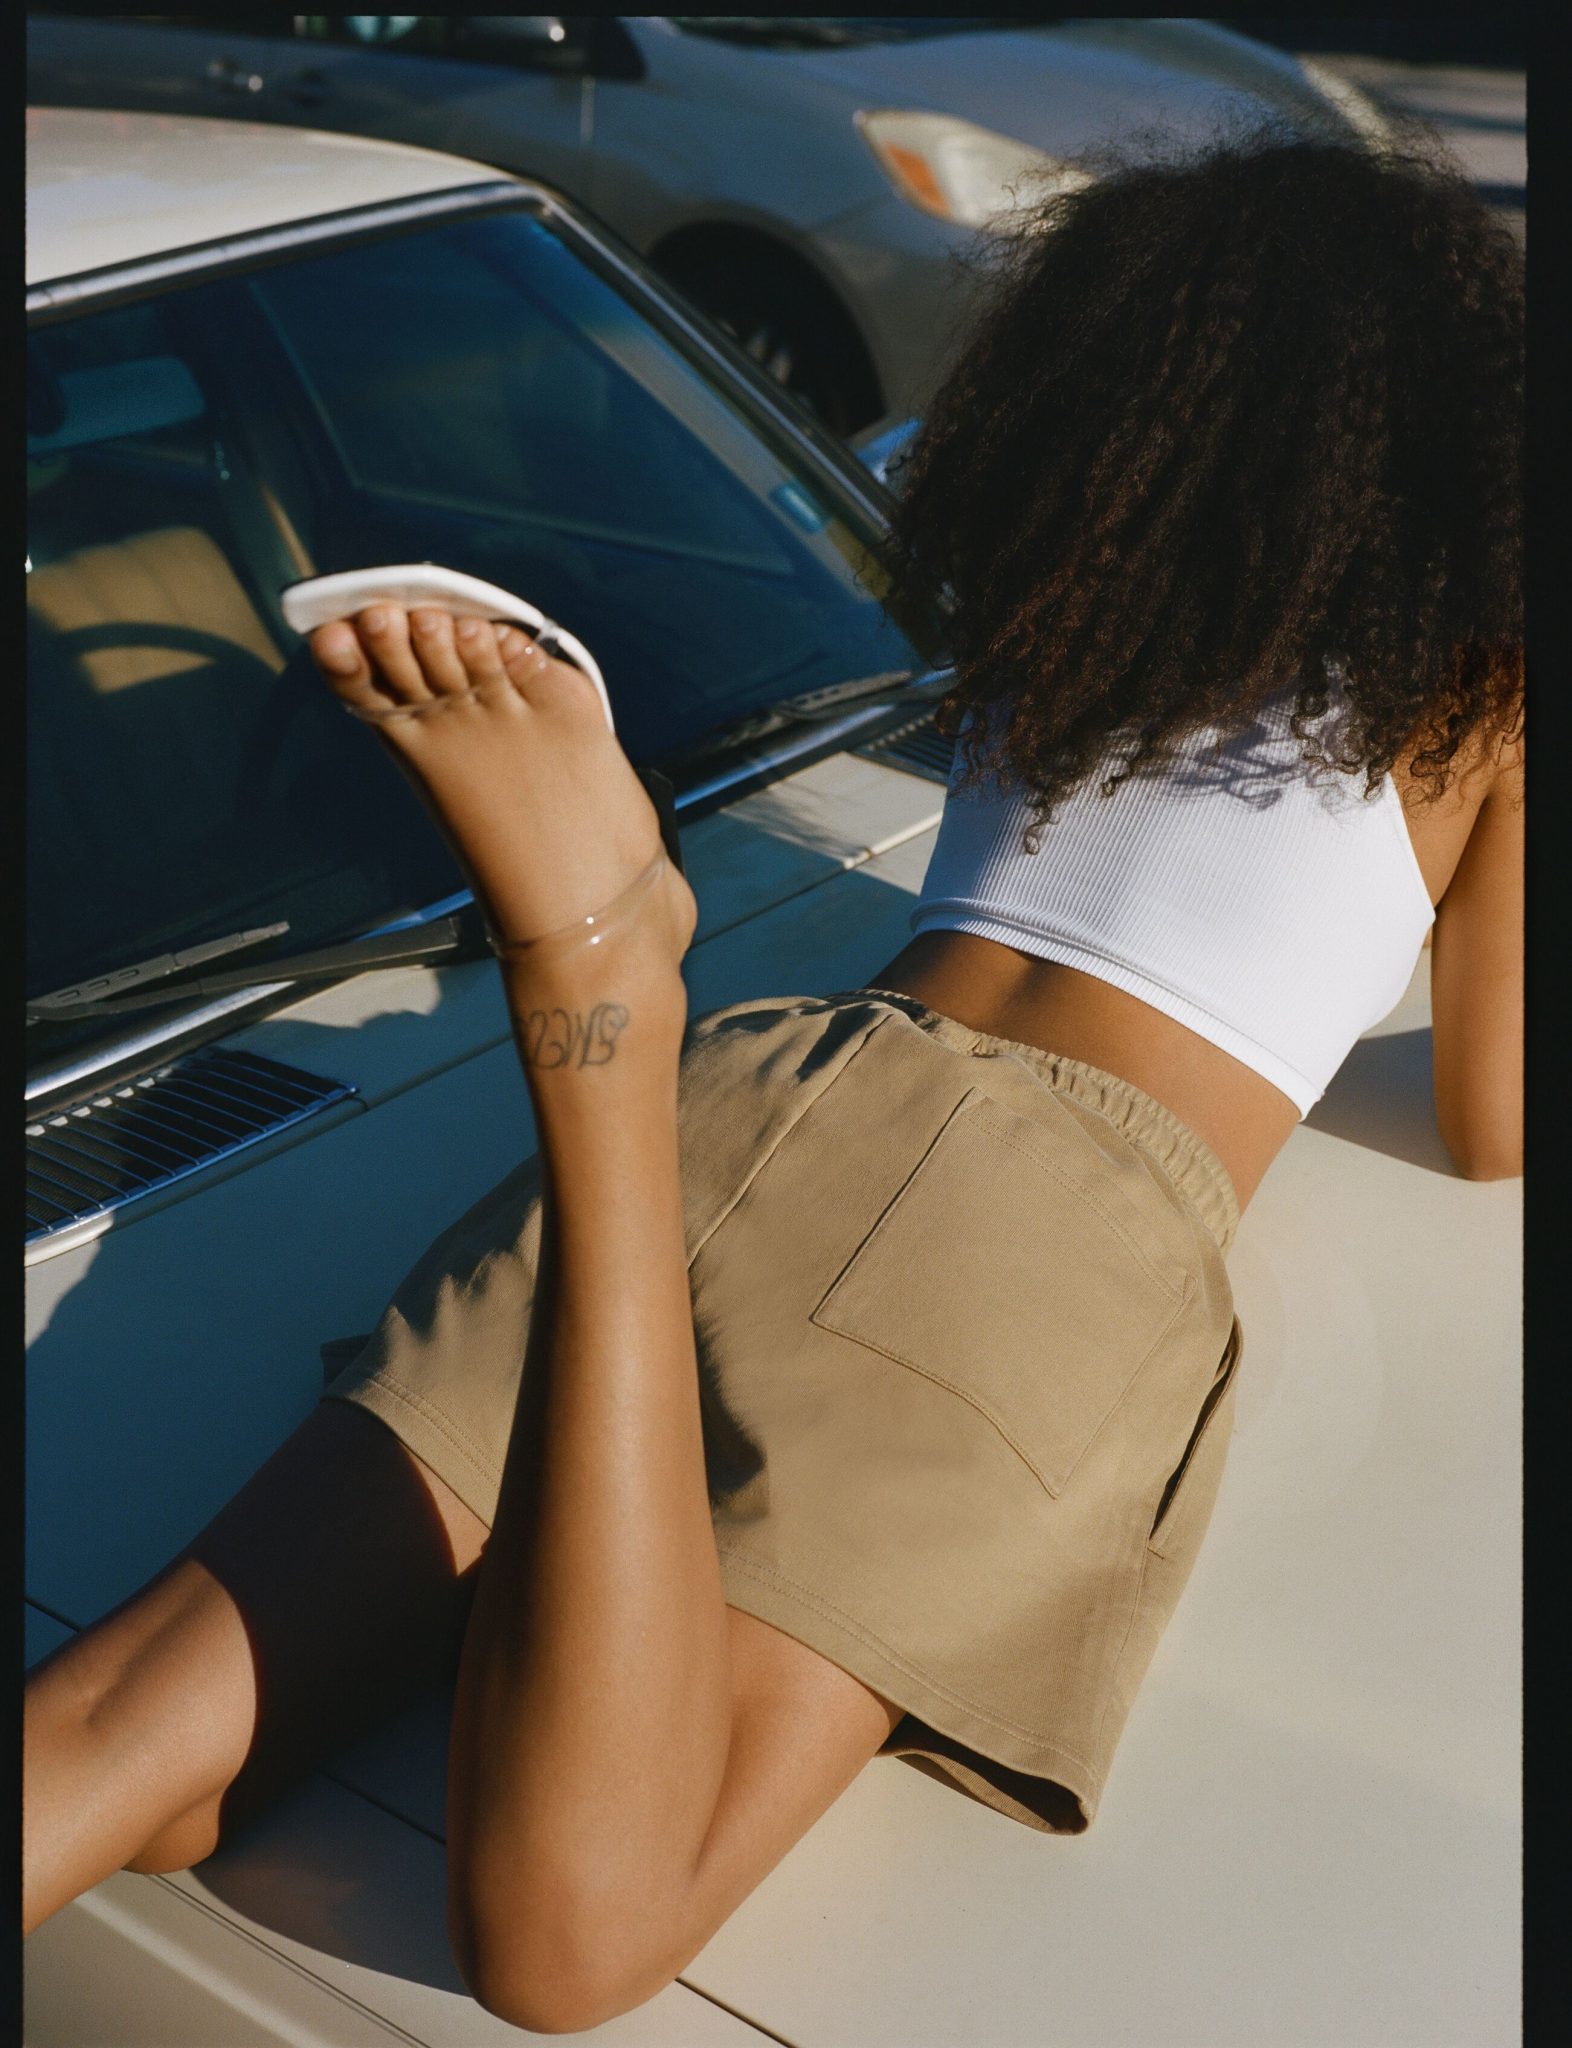 urban outfitters is kicking off spring with shorts styled by l.a. women